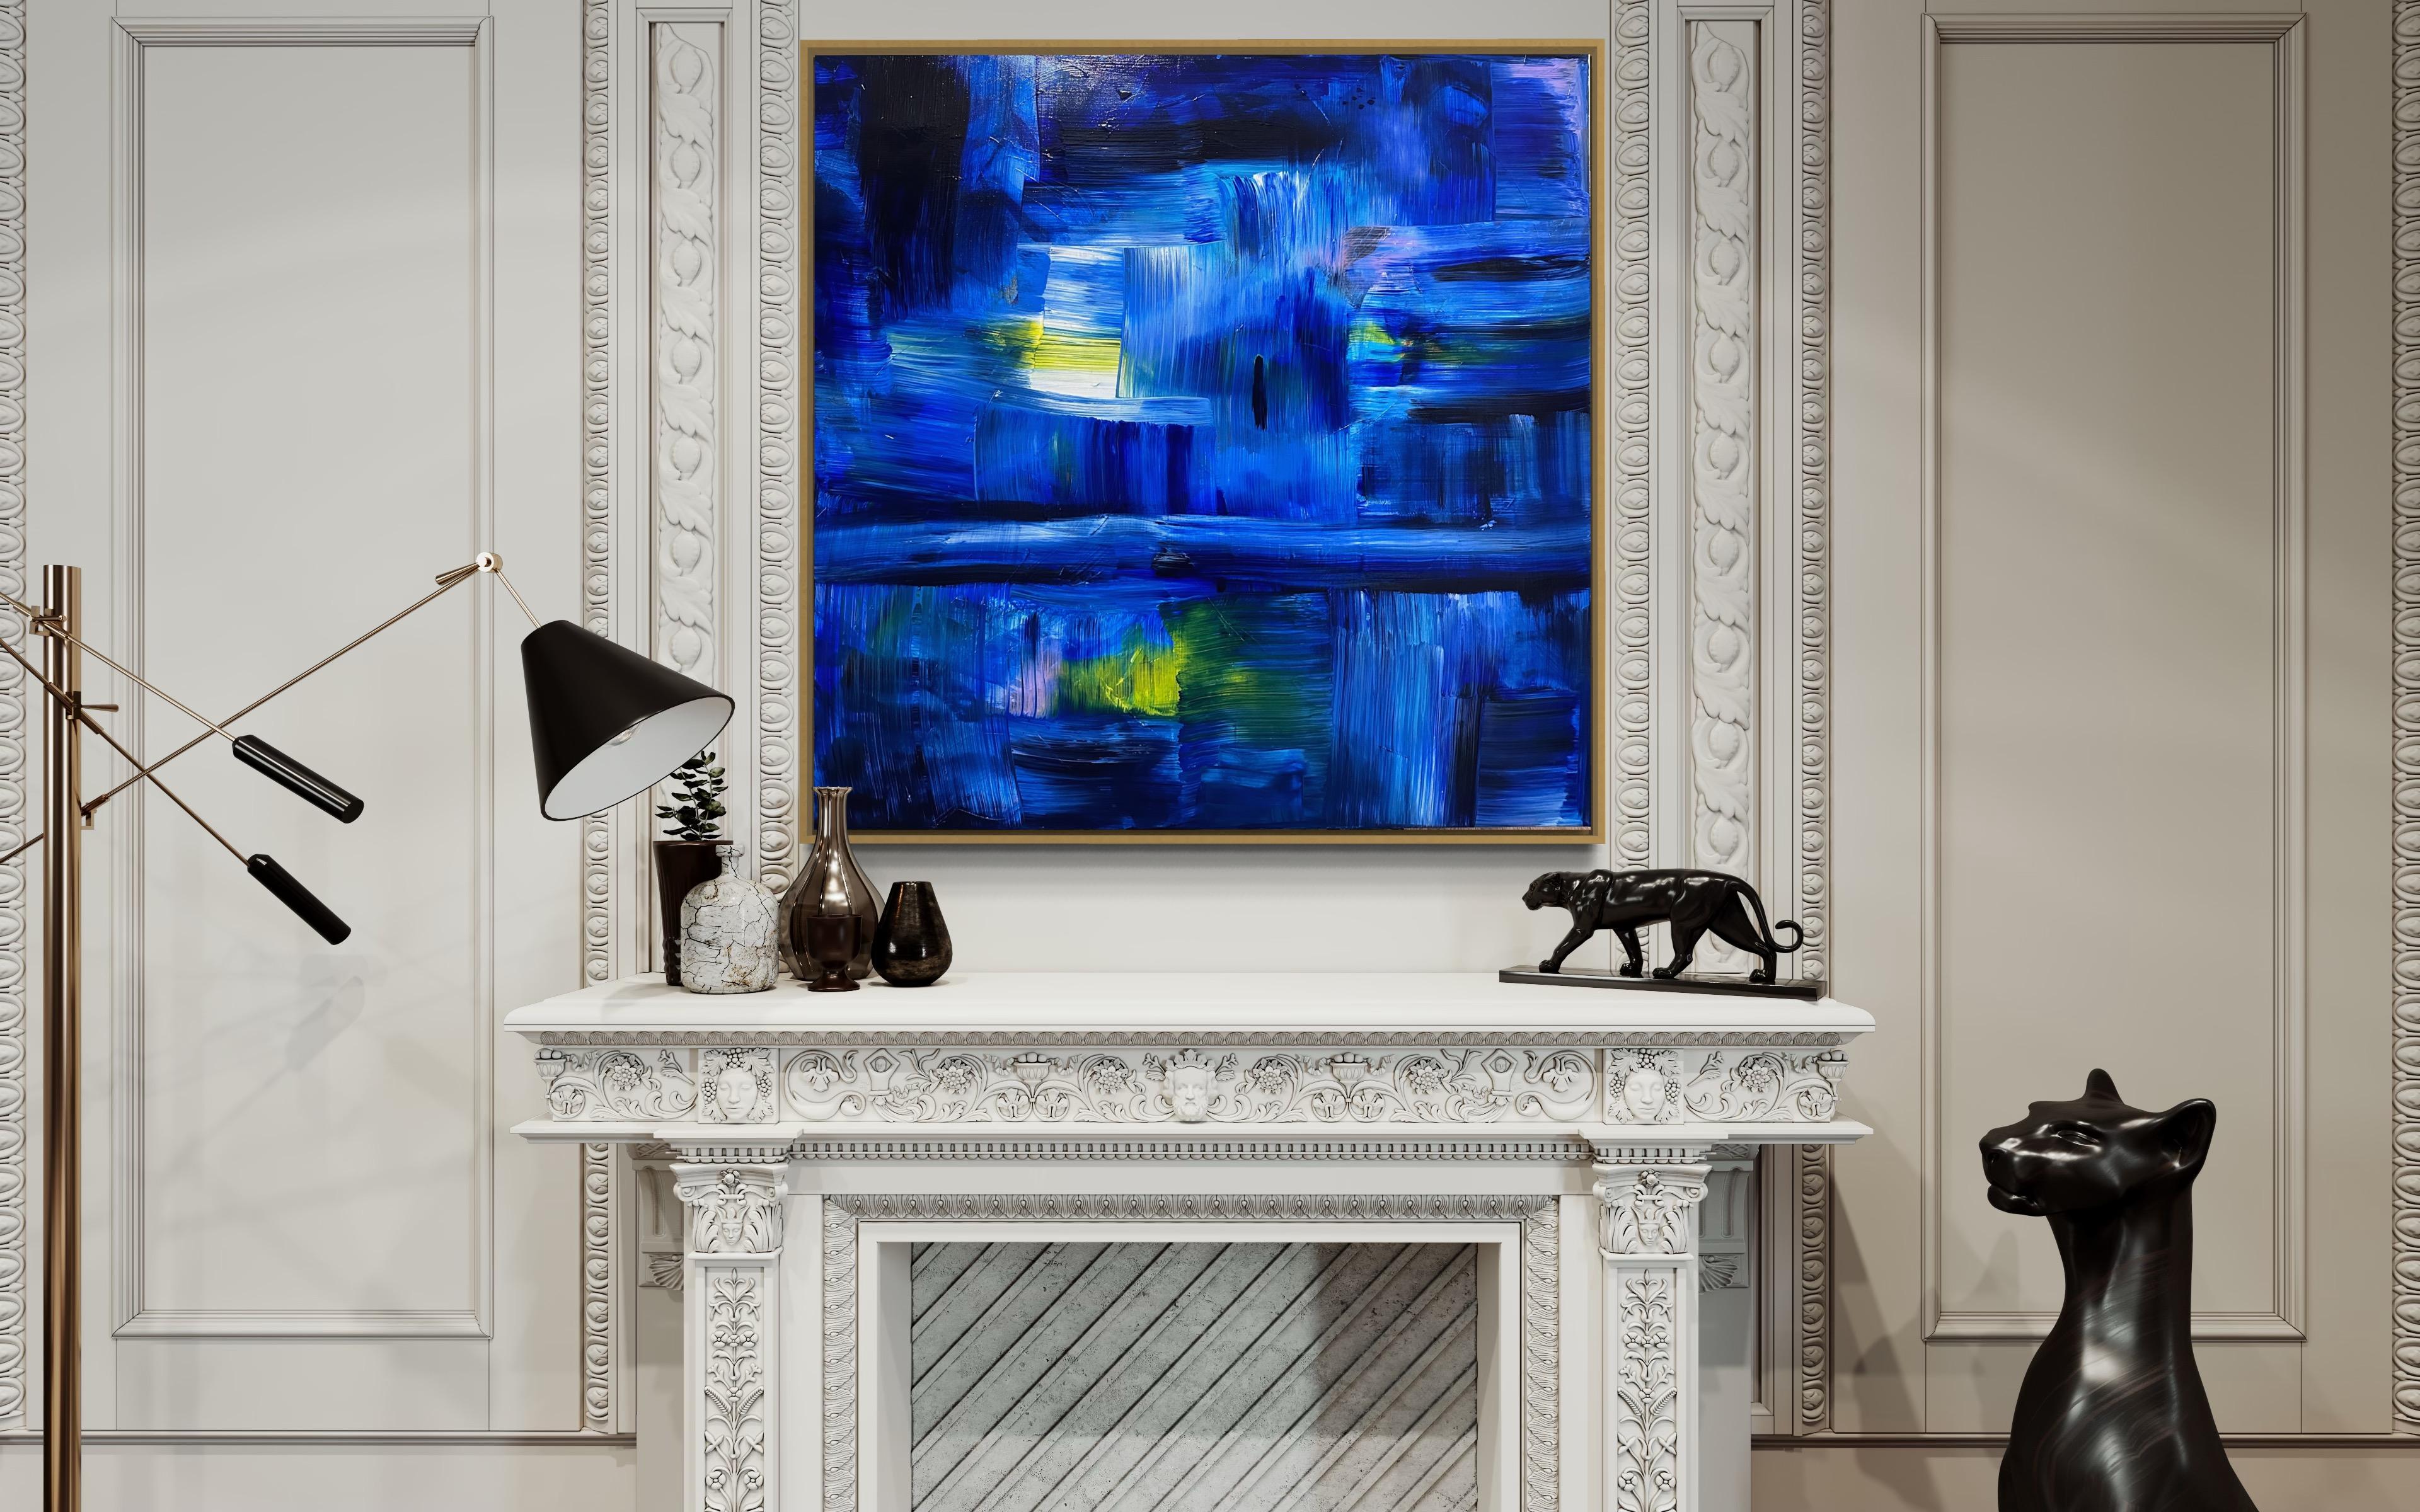 Kimberly Marney
What Lies Beneath - Yellow (Abstract, Blue, Cityscape, Yellow)
2023
Acrylic on Canvas
Size: 36x36x1.5in
Signed by hand
COA provided
Ref.: 924802-2006

Tags: Abstract, Blue, Cityscape, Yellow

Abstracted layers of blues and pops of